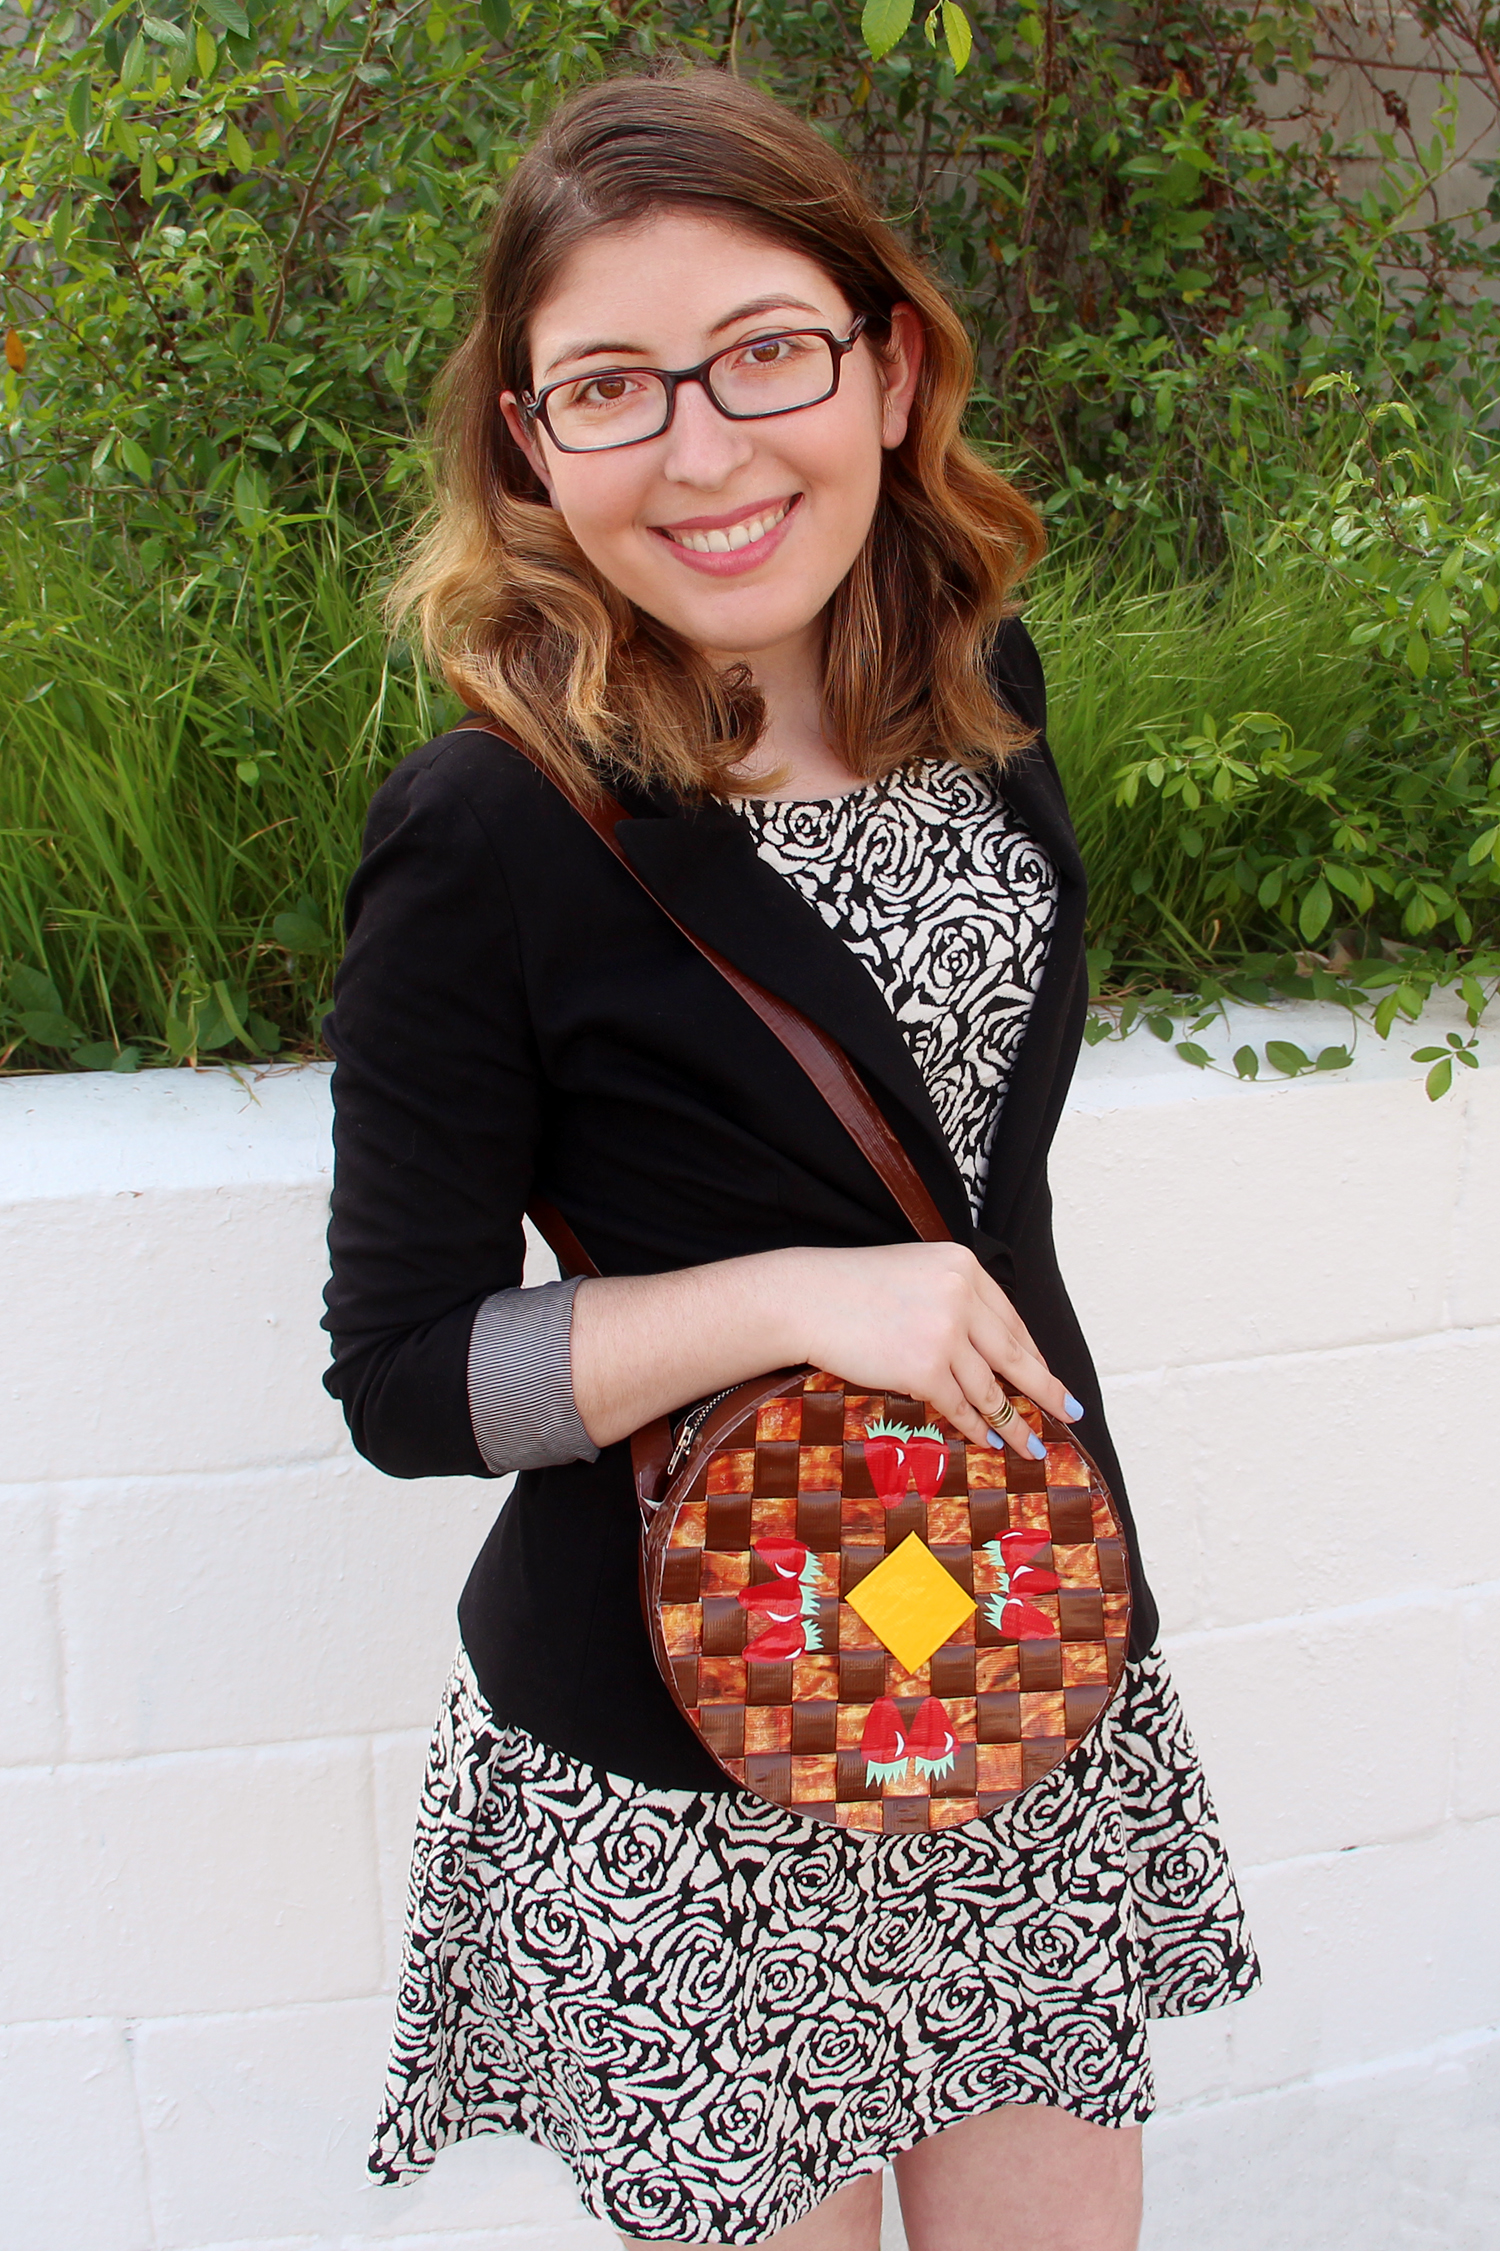 DIY Waffle Purse from Parks & Rec - YouTube